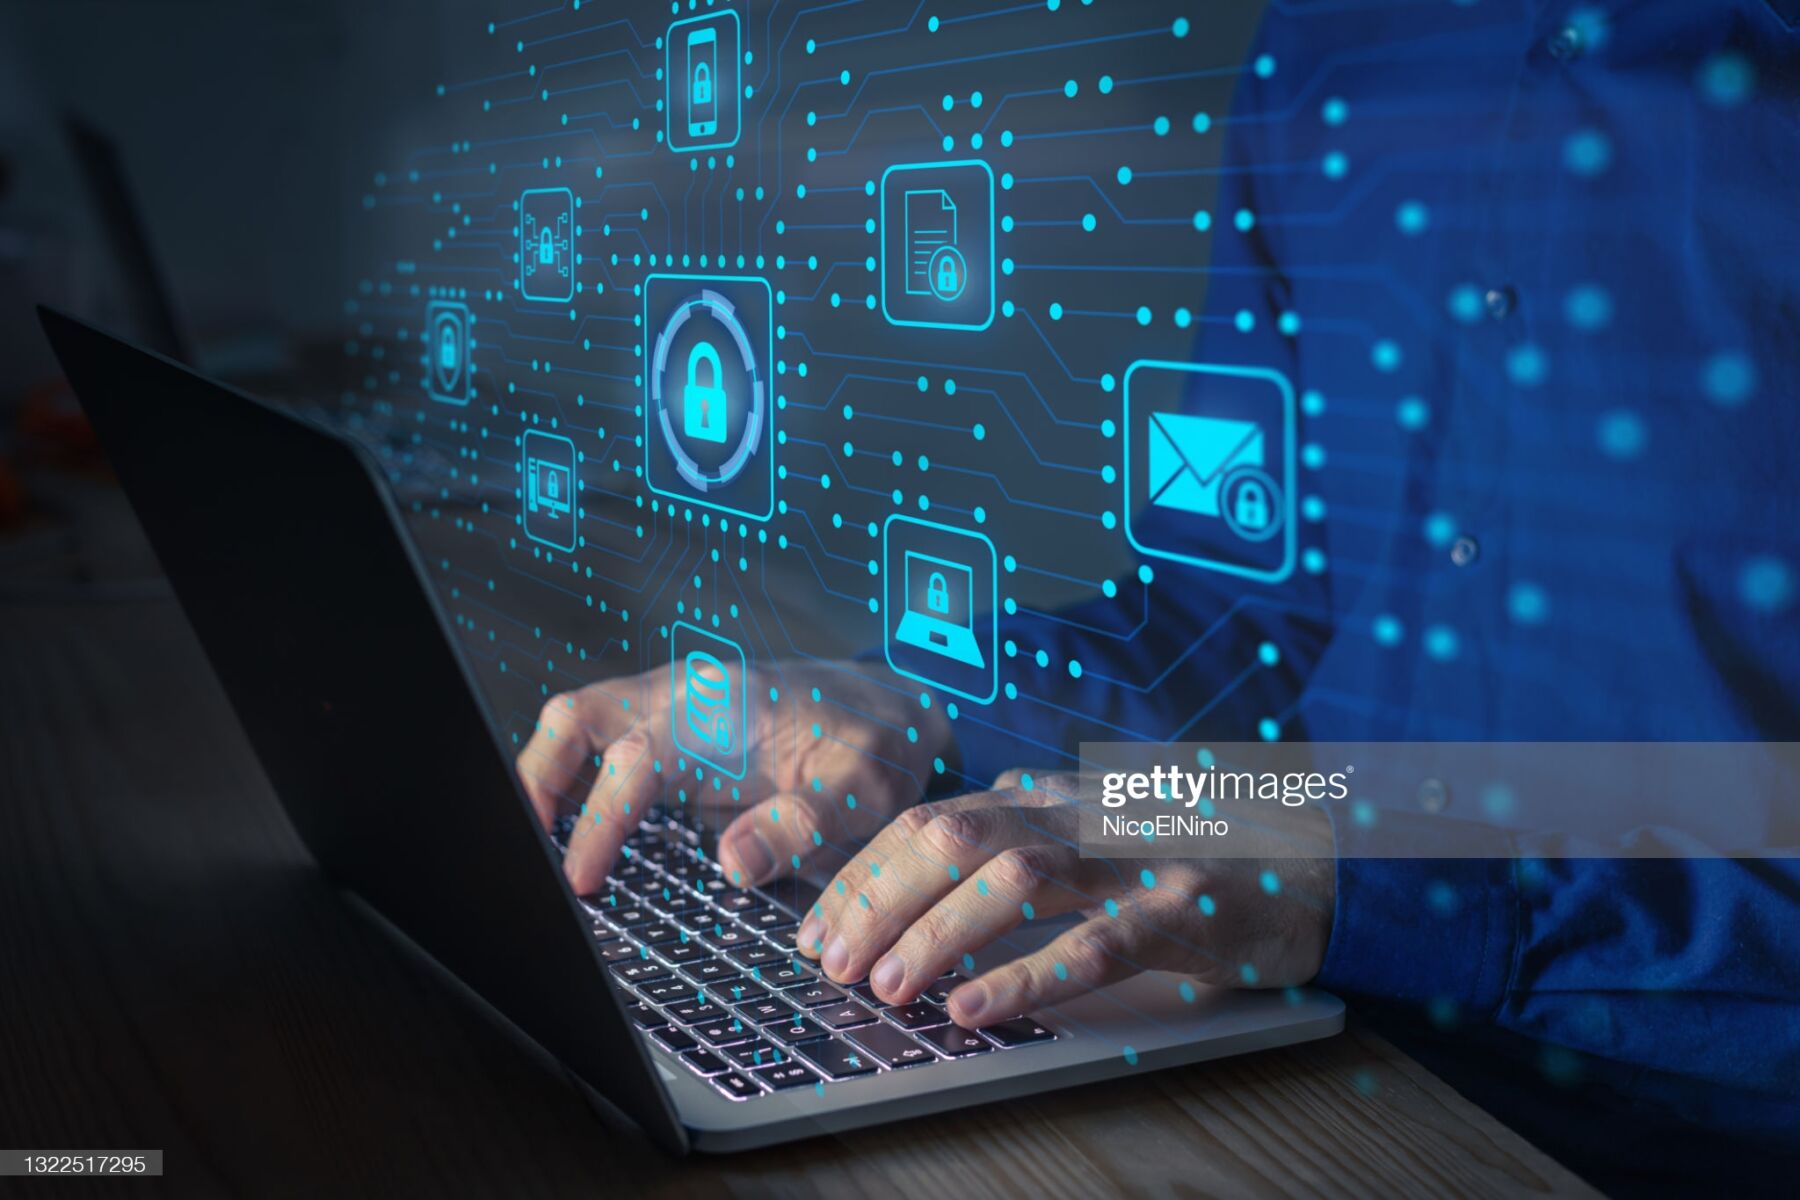 Cyber security IT engineer working on protecting network against cyberattack from hackers on internet. Secure access for online privacy and personal data protection. Hands typing on keyboard and PCB